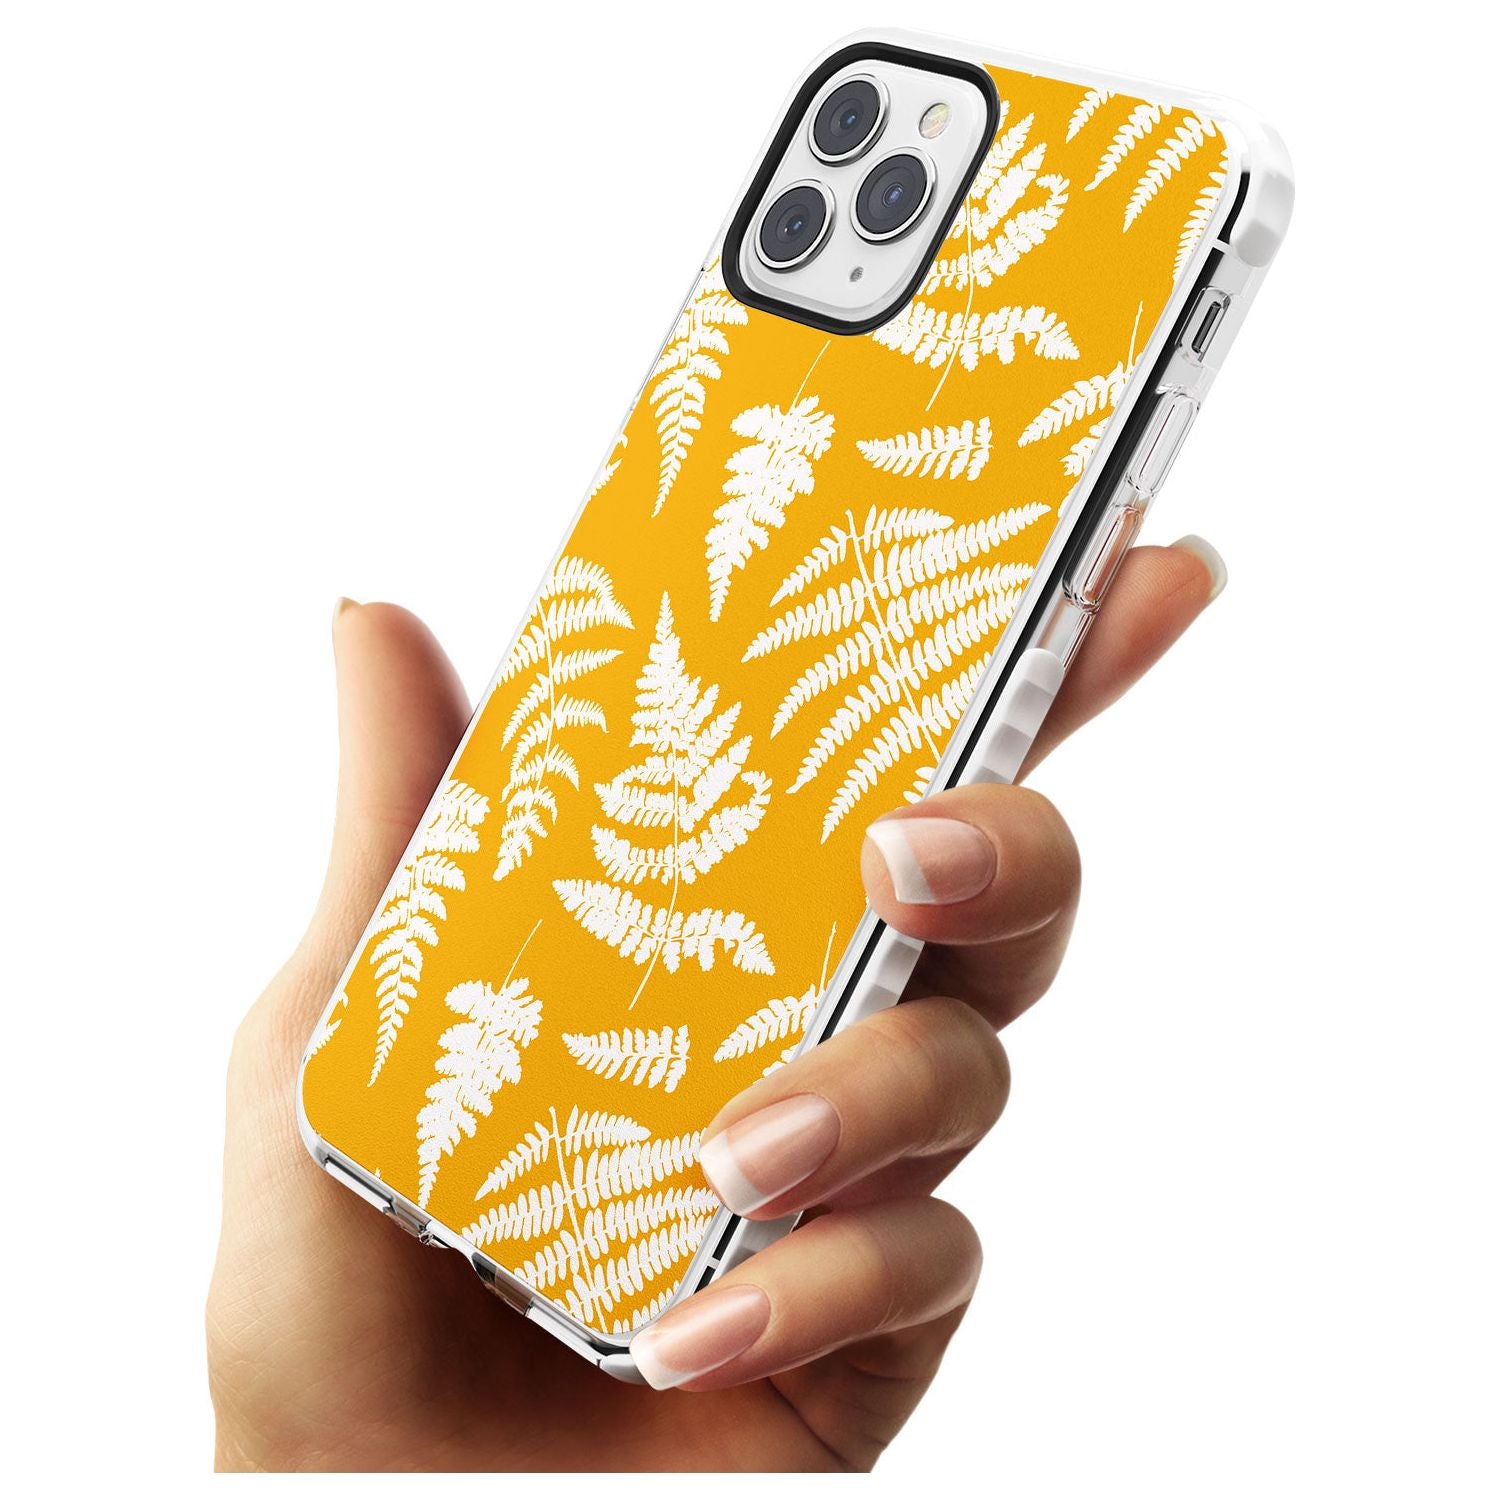 Fern Pattern on Yellow Impact Phone Case for iPhone 11 Pro Max